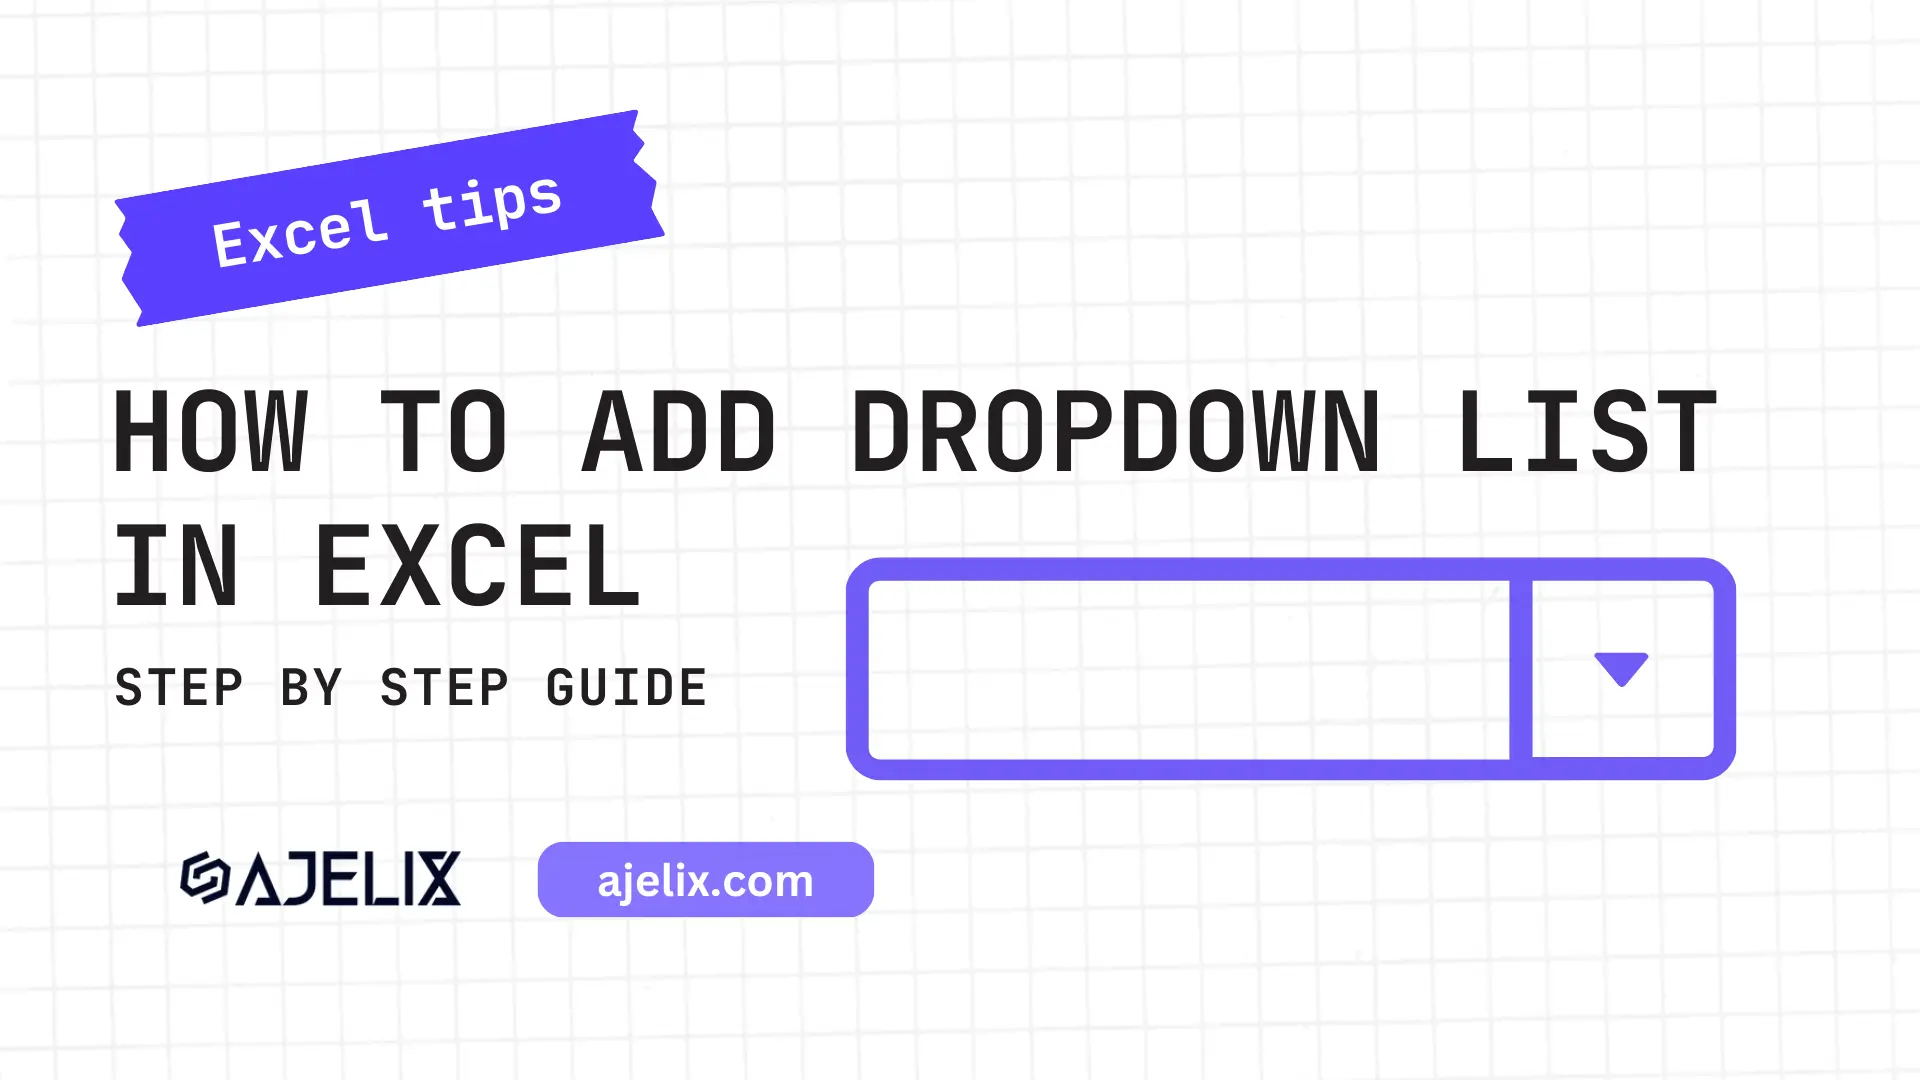 How To Add Drop Down List in Excel